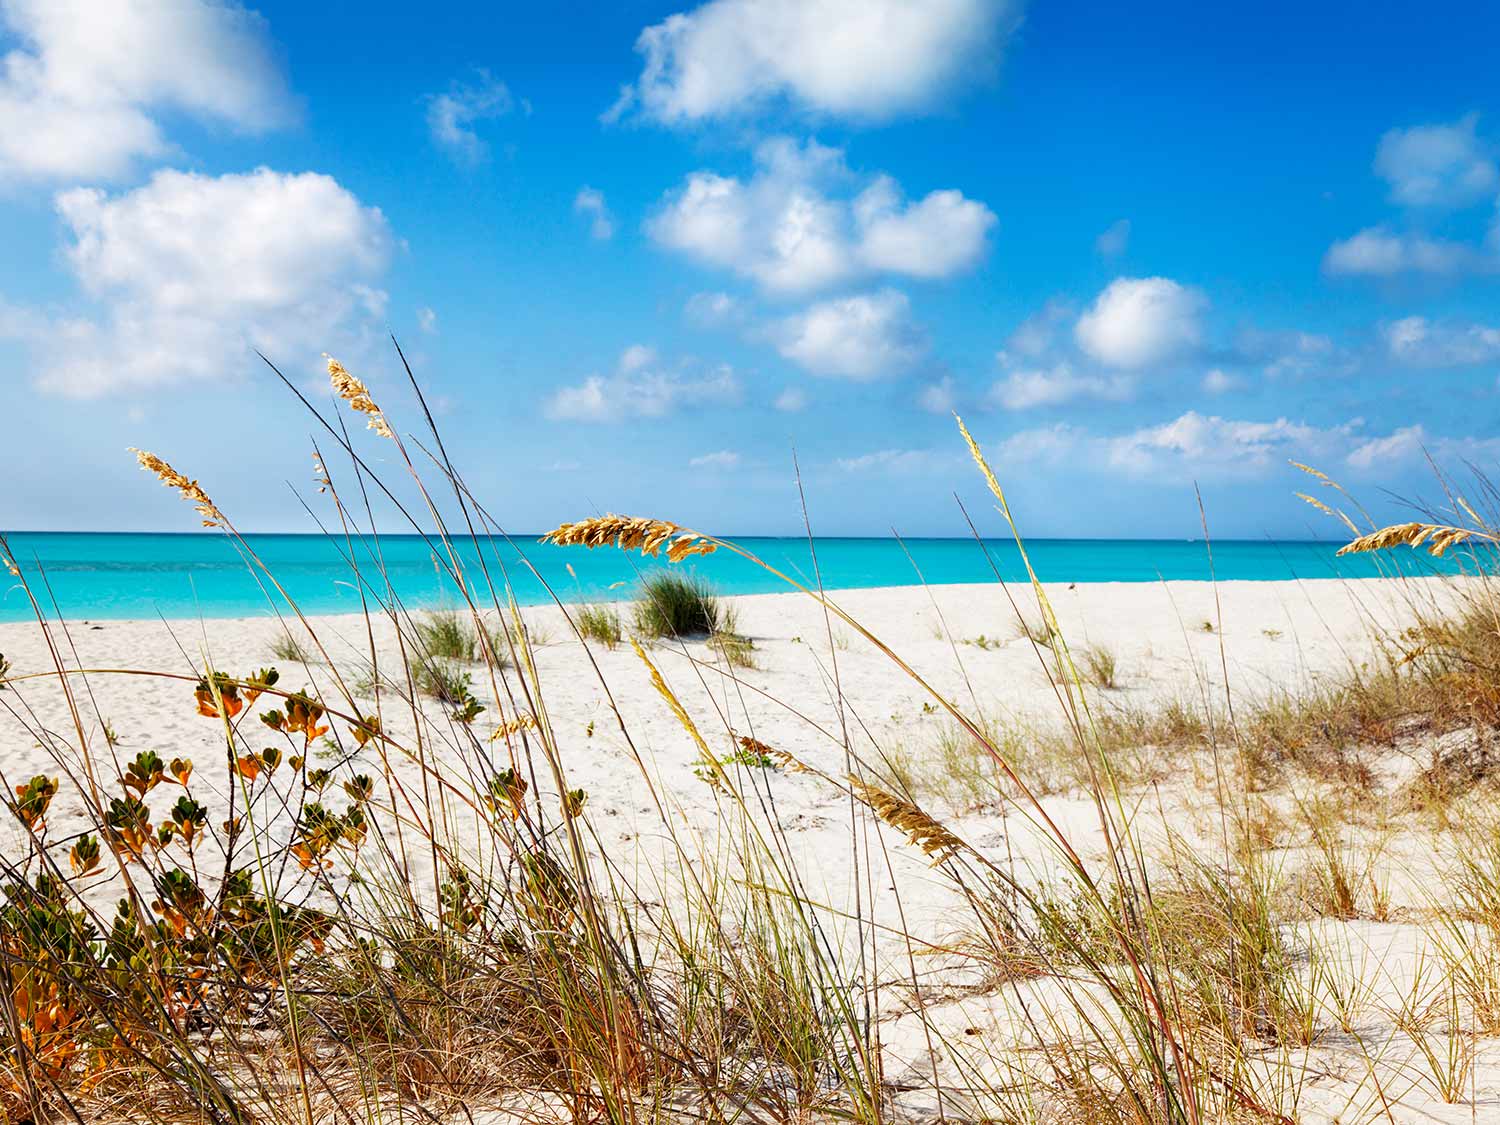 Water Cay Beach in Turks and Caicos perfectly displays the region's immense natural beauty.